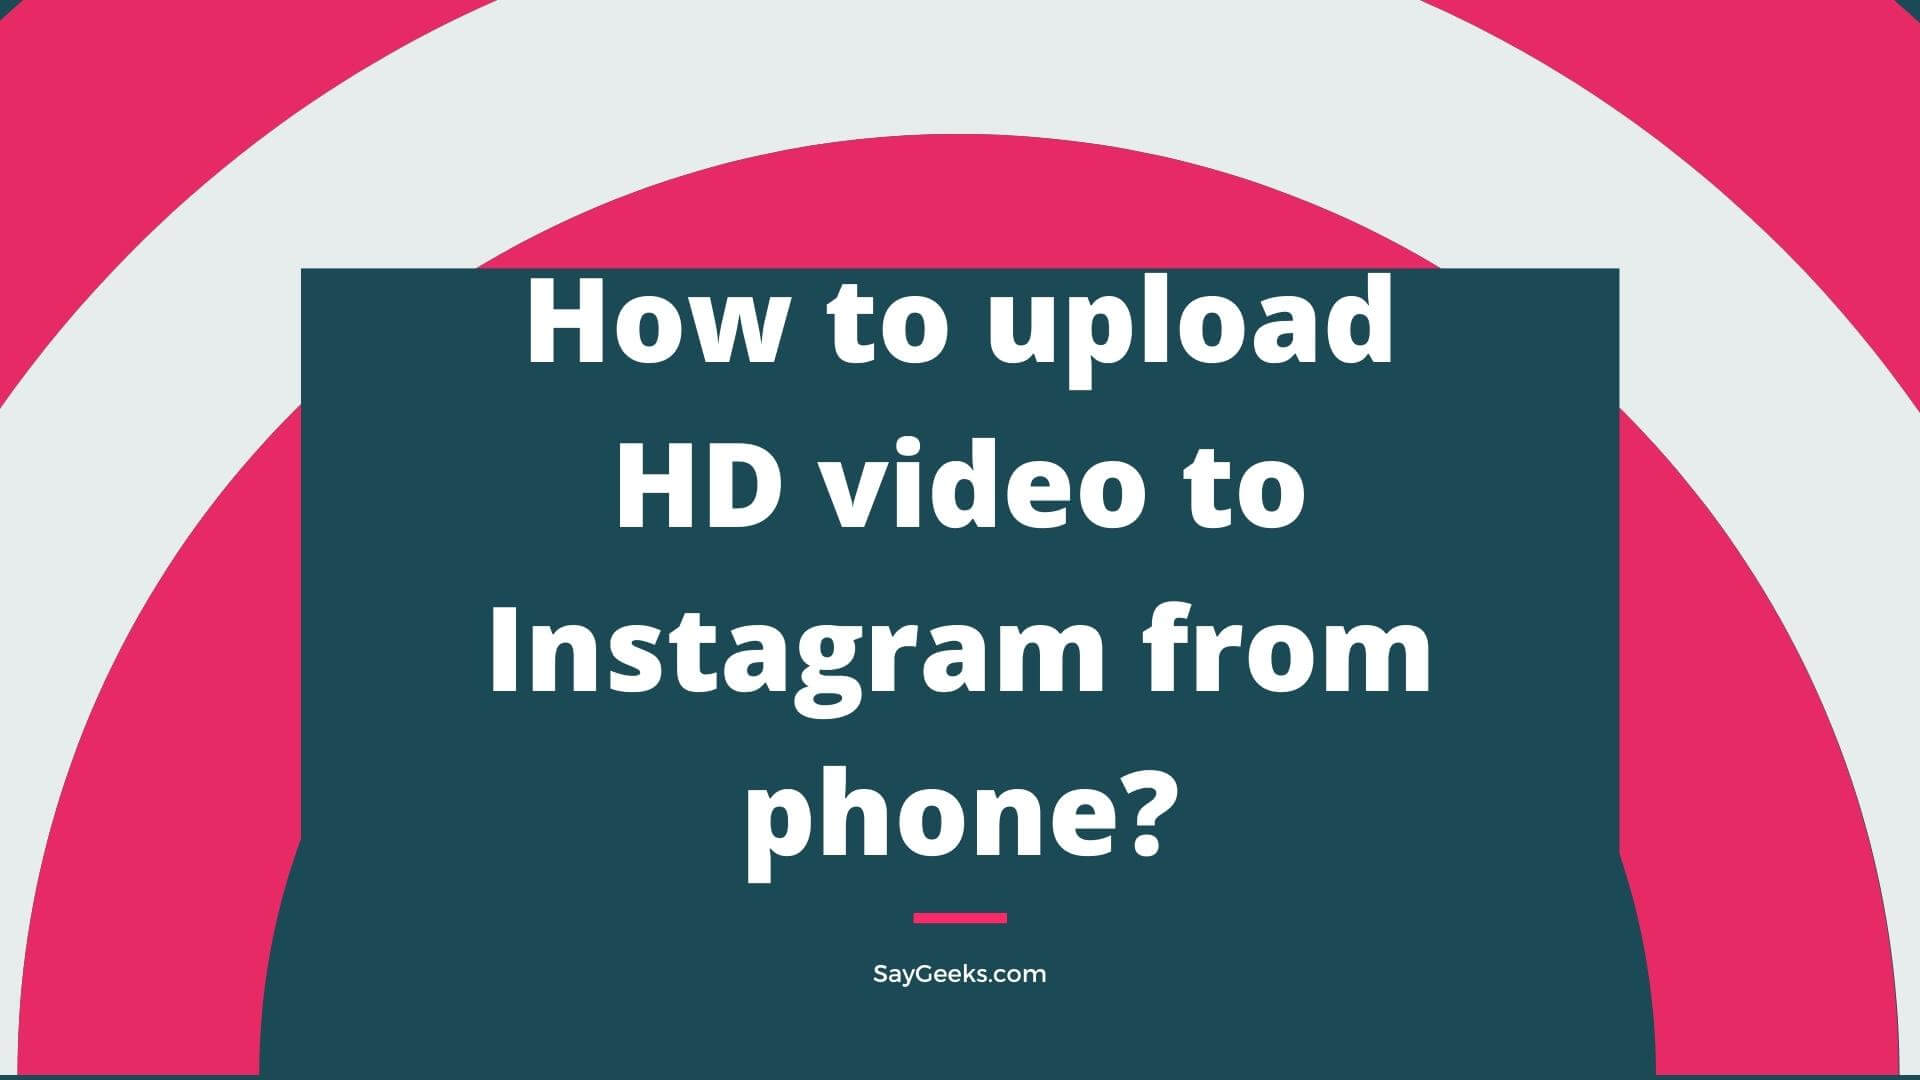 how to upload HD video to Instagram from phone